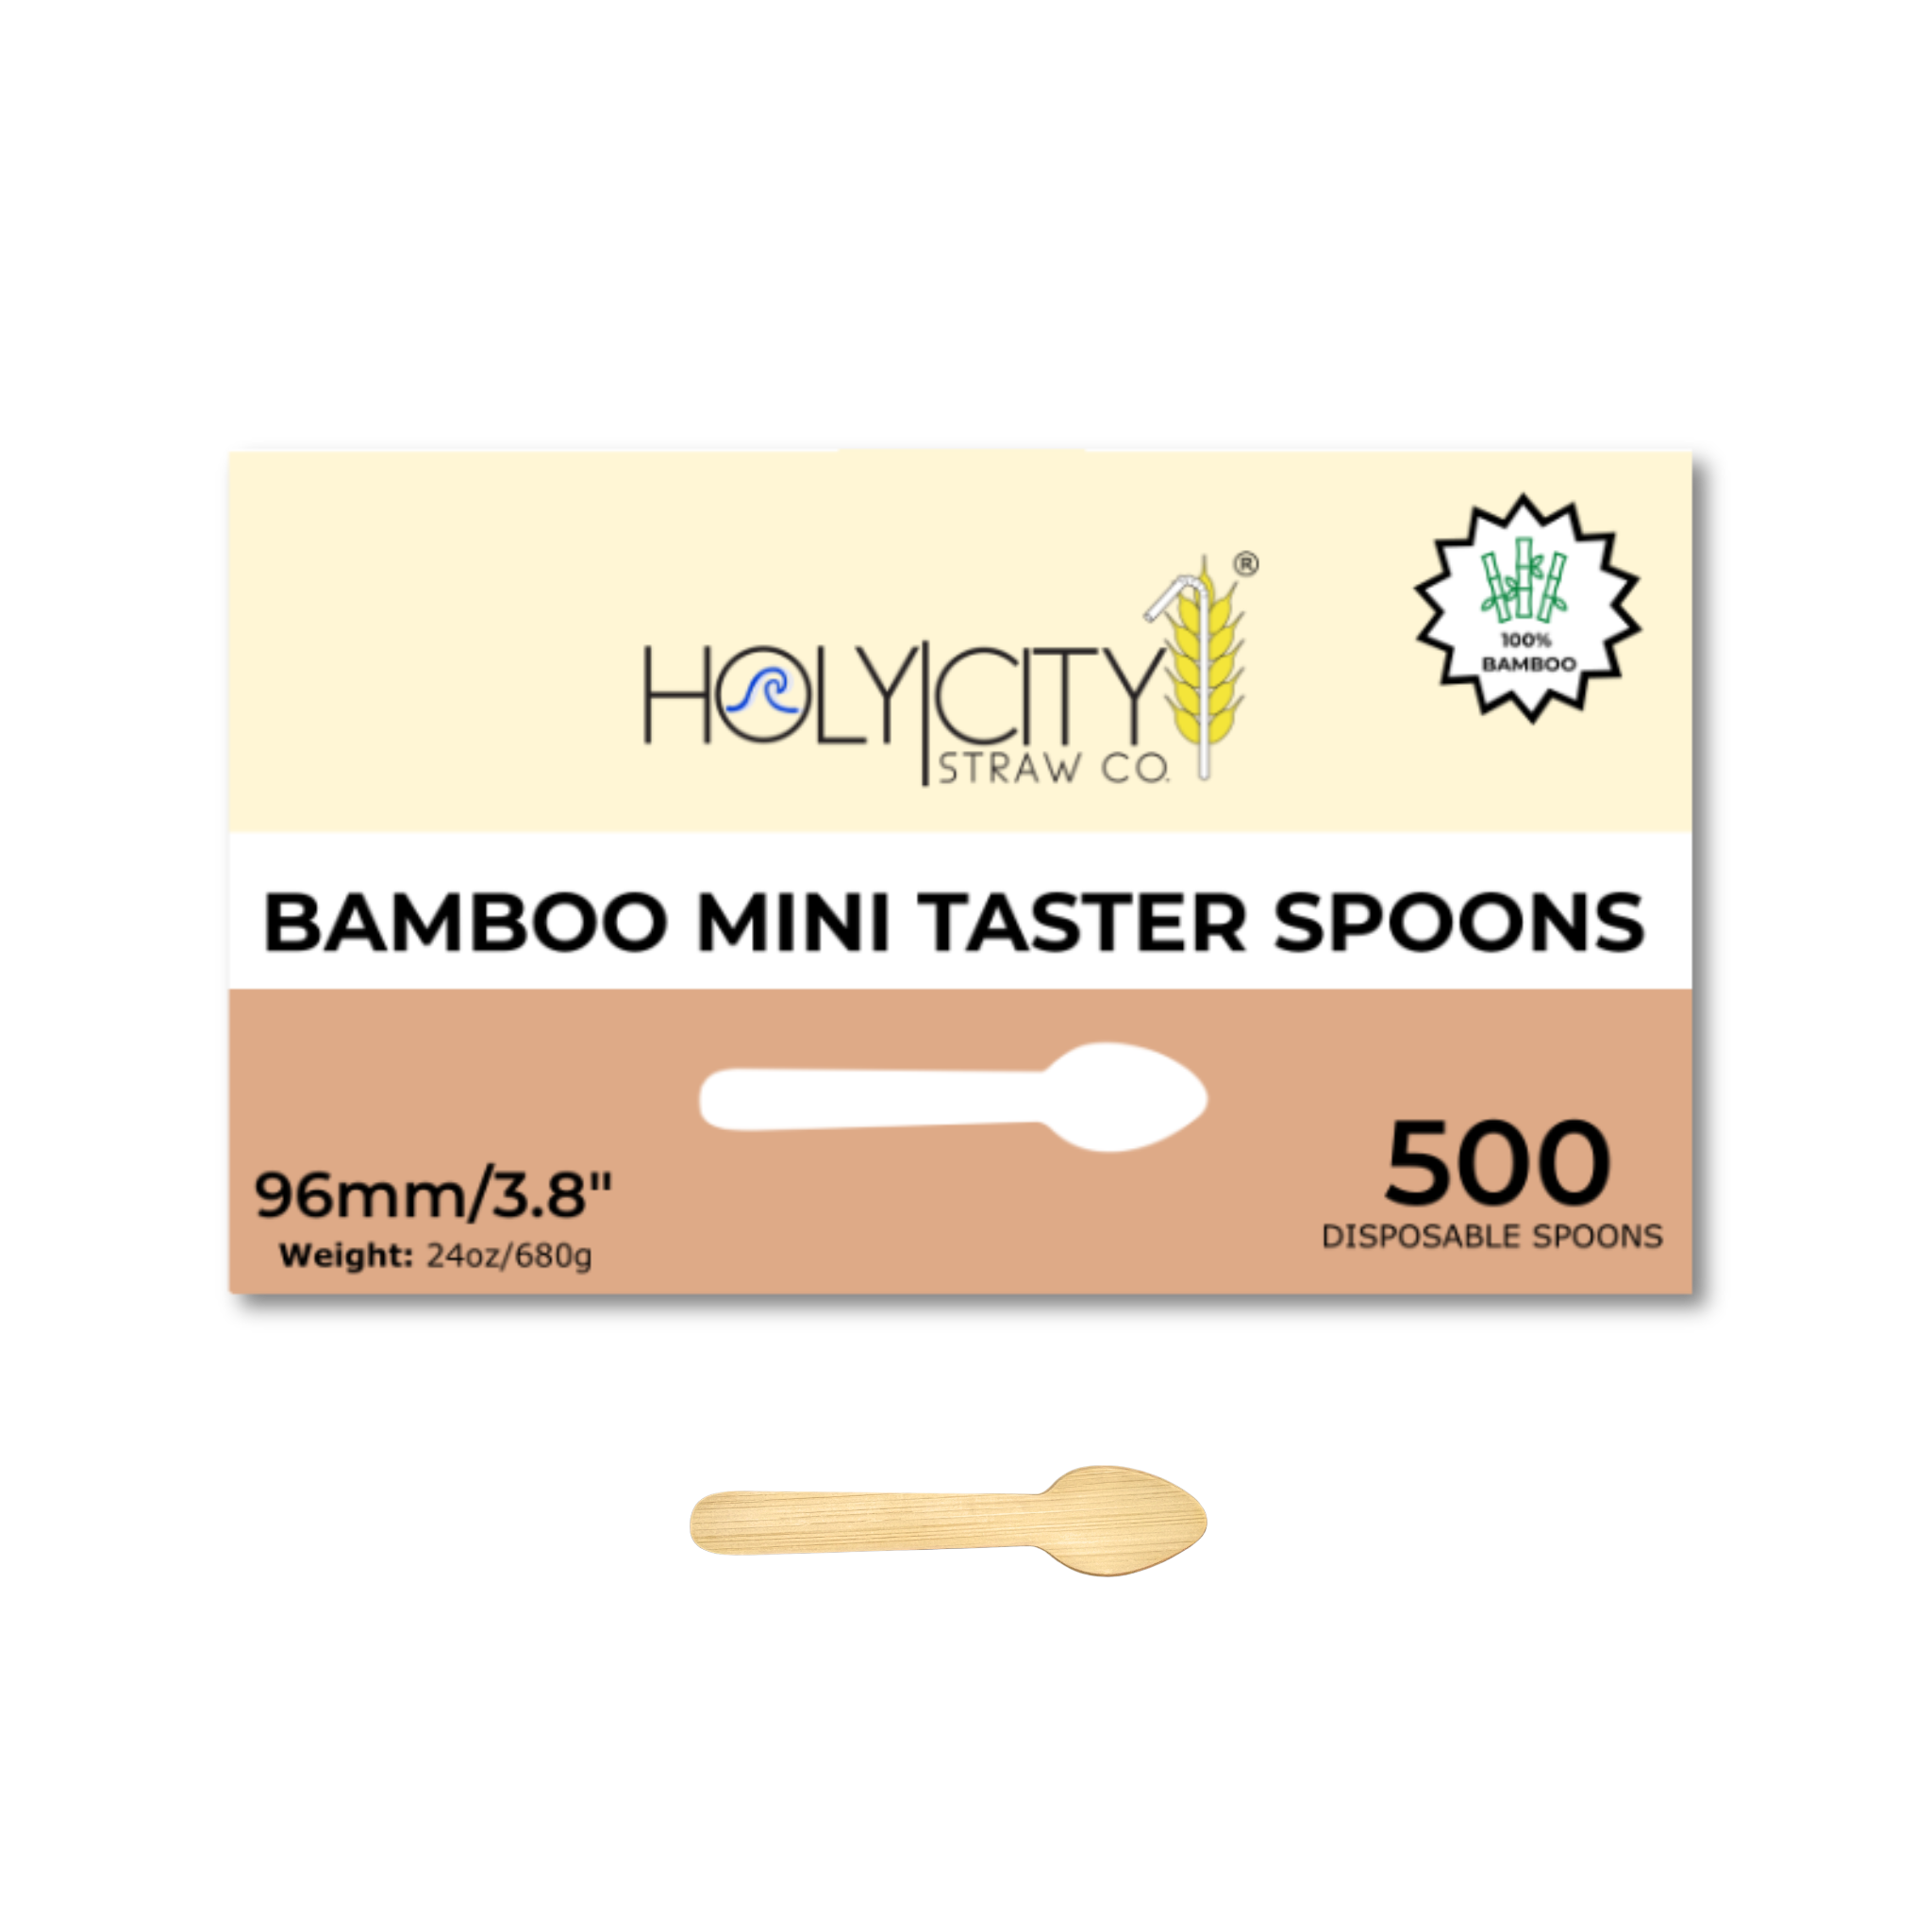 Box of Holy City Straw Company Wrapped Bamboo Mini Taster Spoons 500 disposable spoons